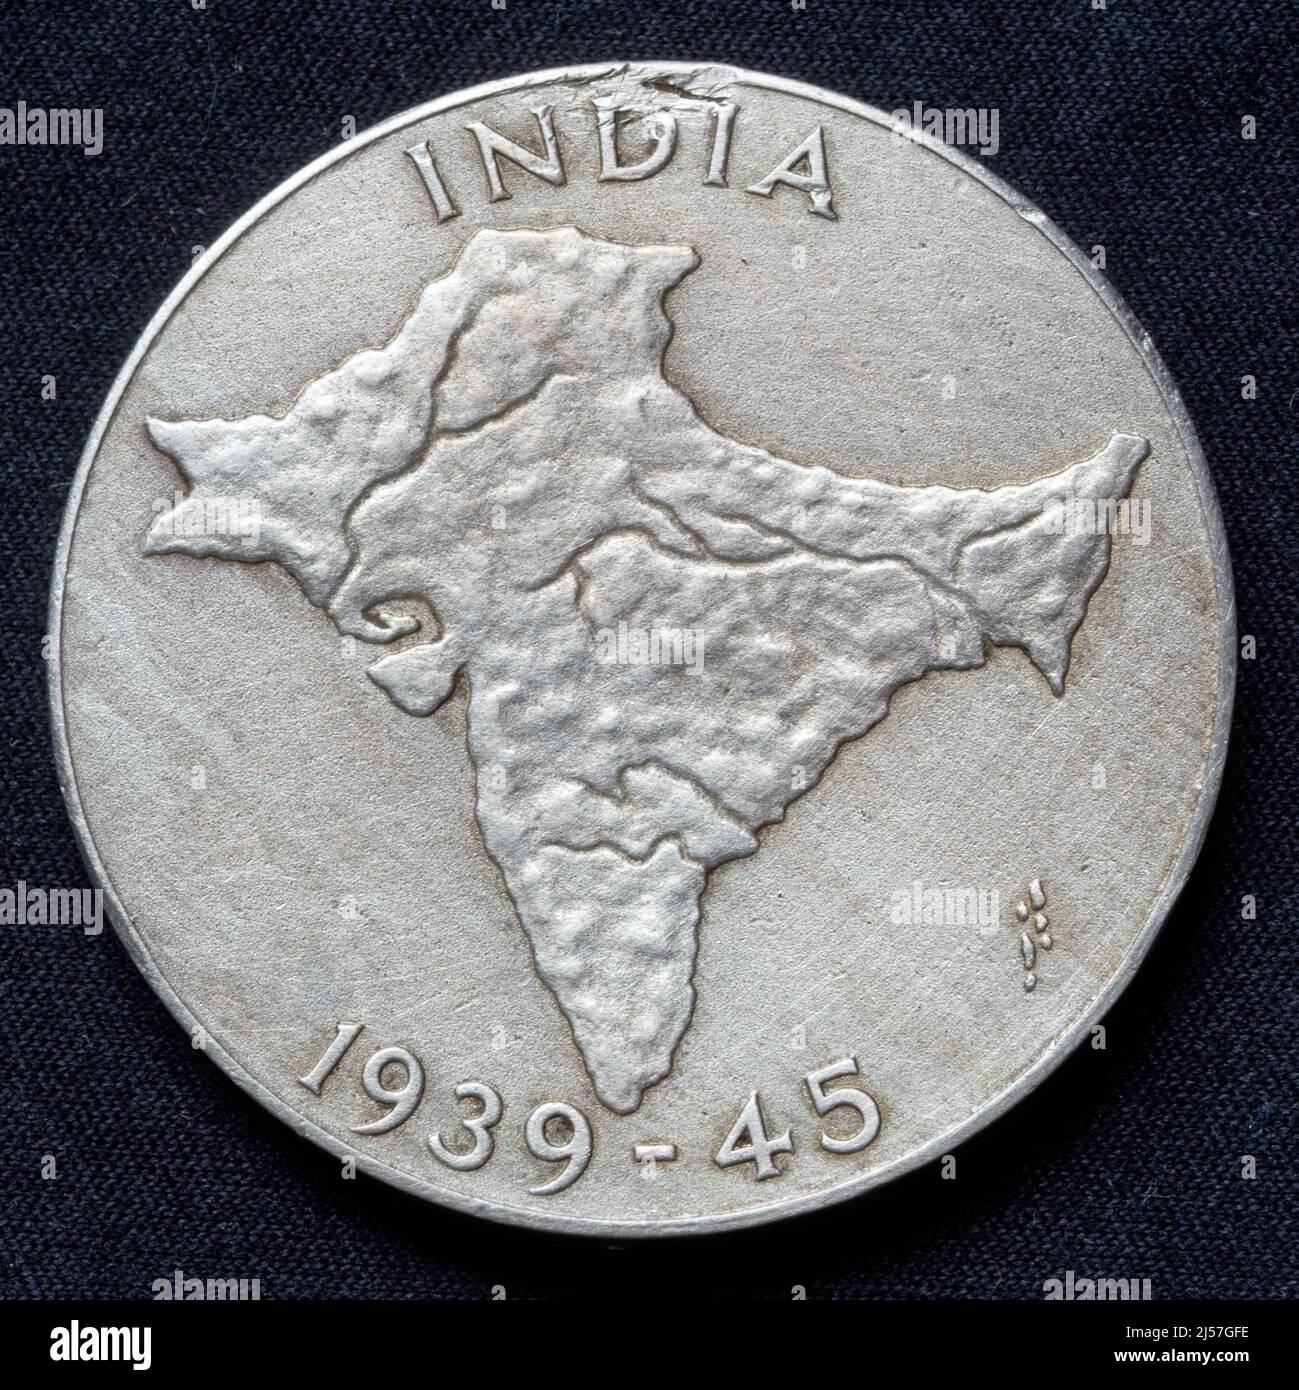 India: India Service Medal 1939 - 1945 (reverse), awarded to Indian Forces for at least 3 years of non-operational service in India between September 1938 and September 1945. This side shows a relief map of India. Stock Photo